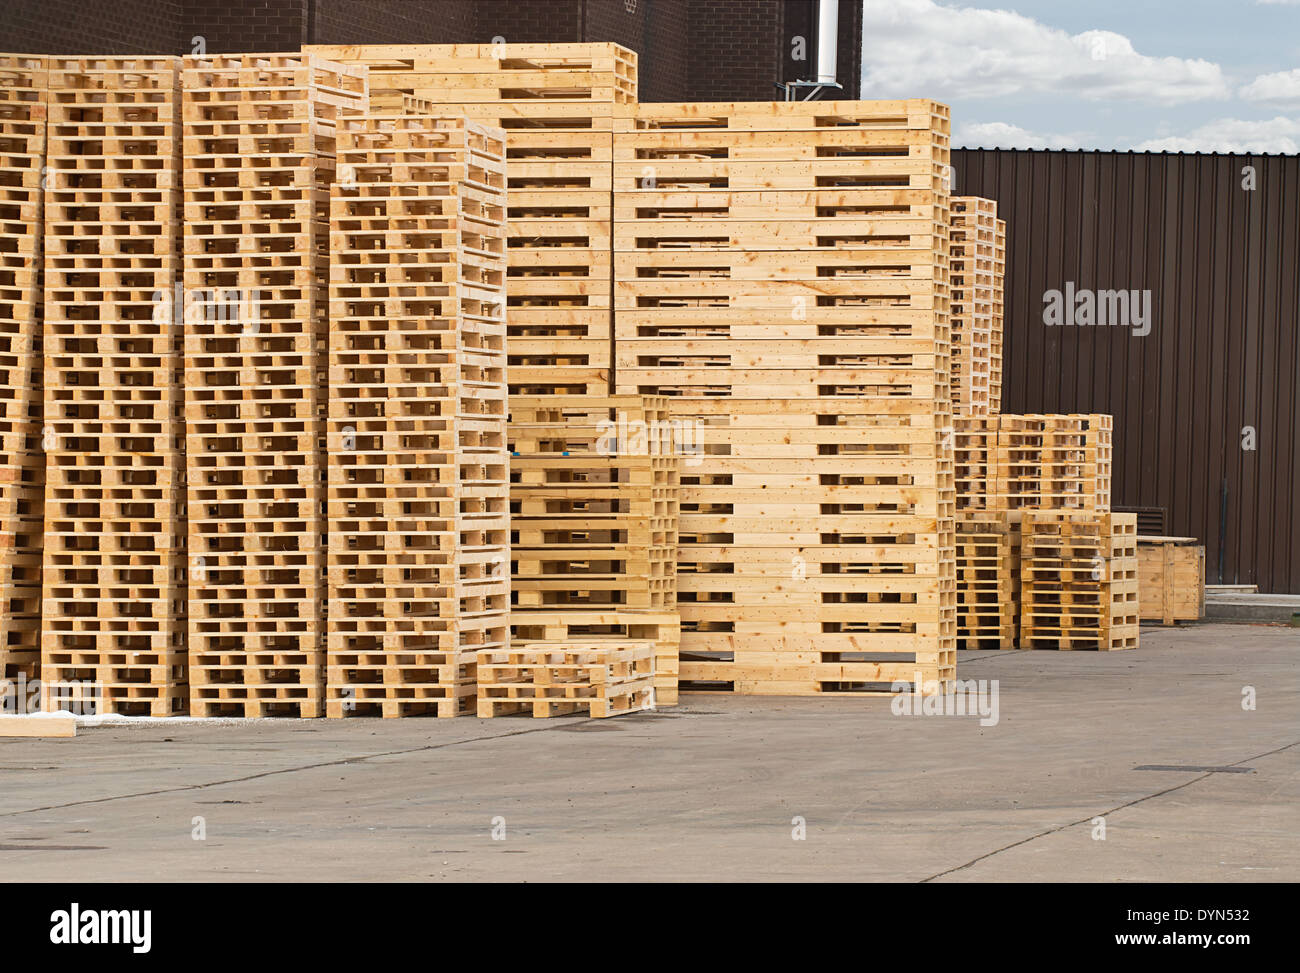 Stock Piles of wooden pallets in a yard ready for breaking up and recycling into firewood or kindling Stock Photo